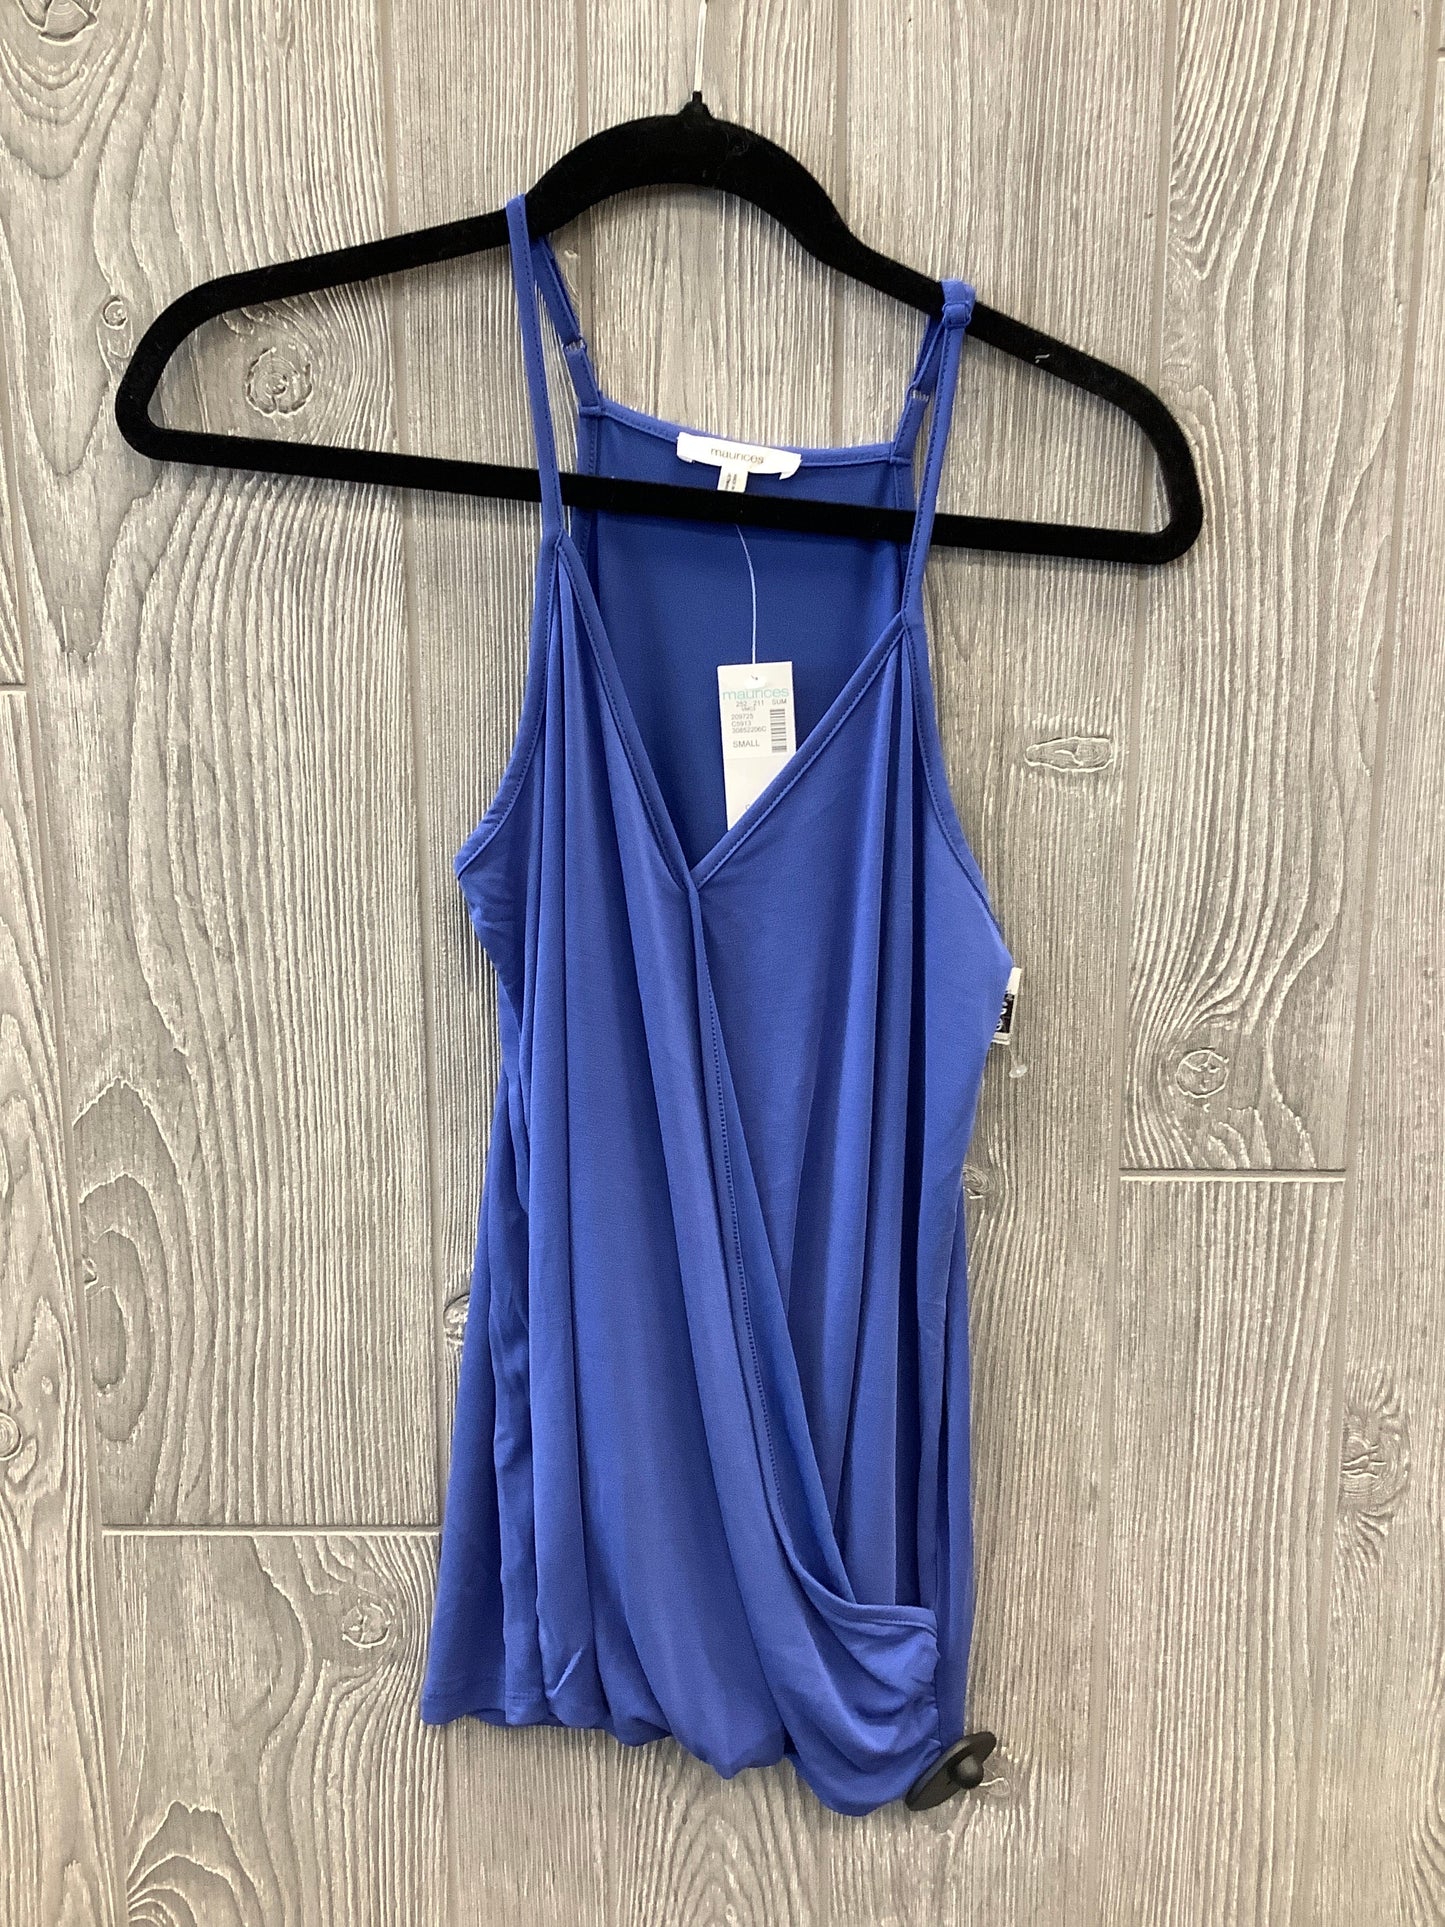 Blue Top Sleeveless Maurices, Size S